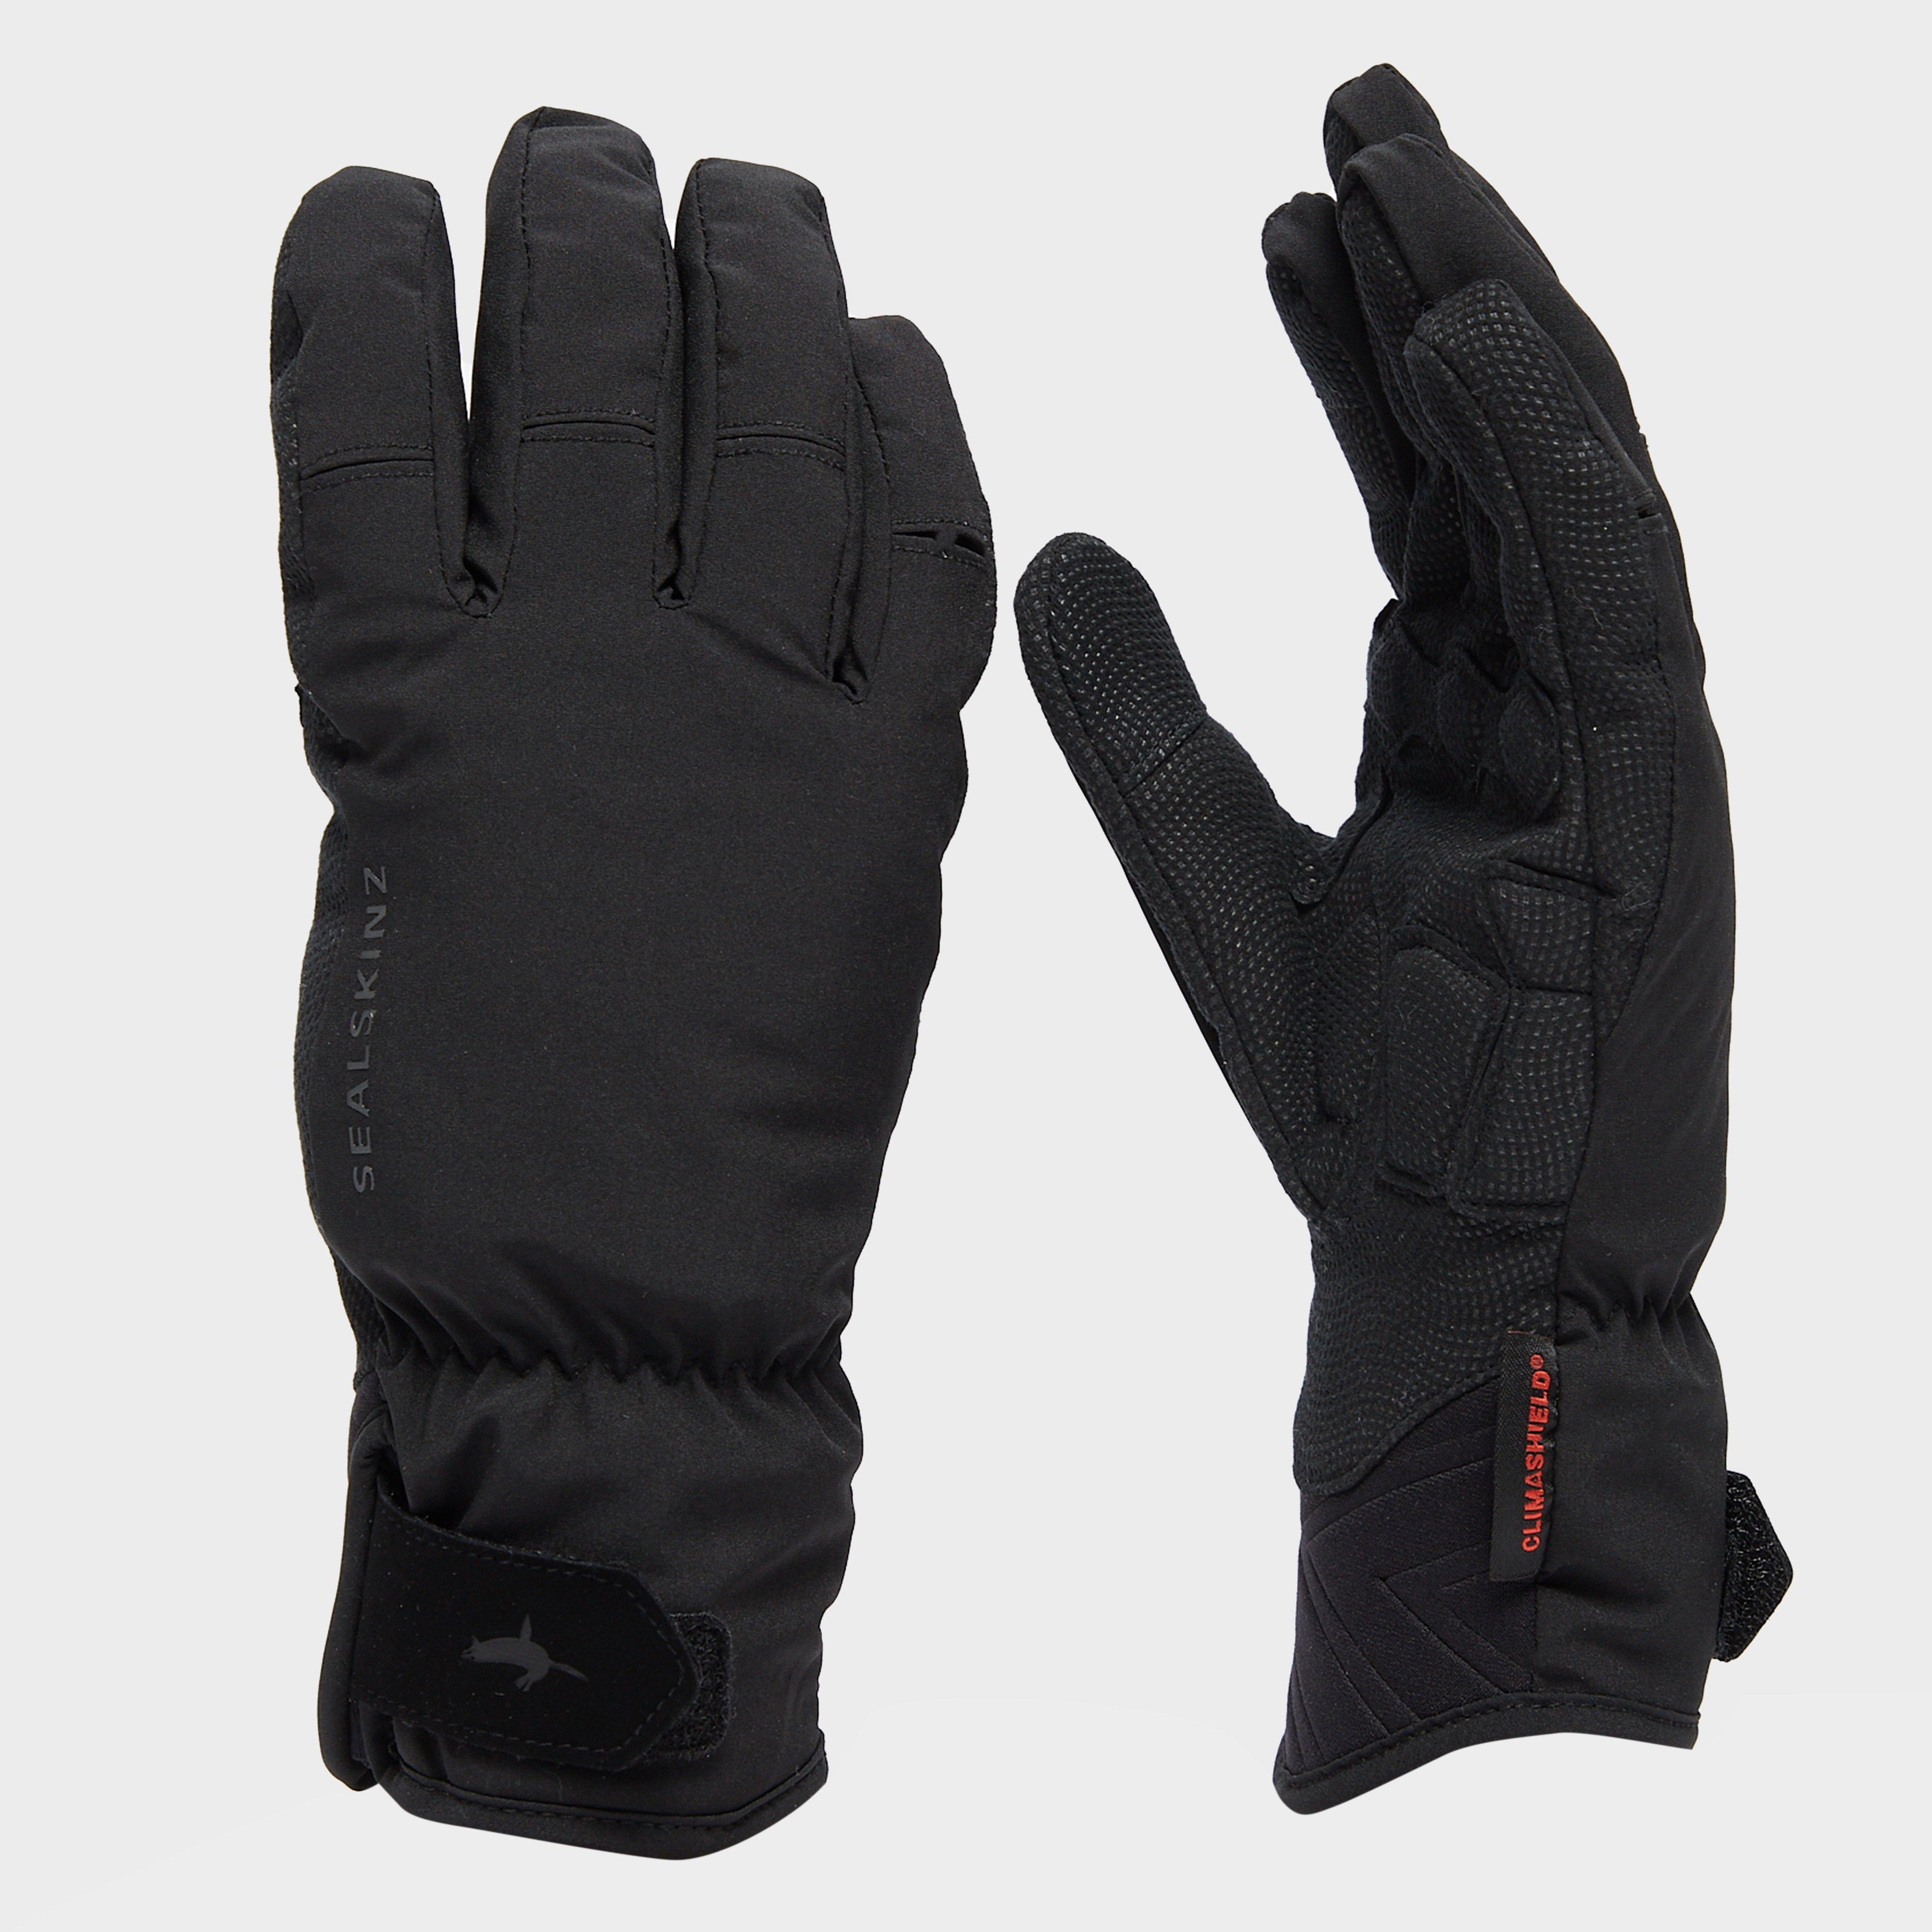 Waterproof Extreme Cold Gloves - Black product